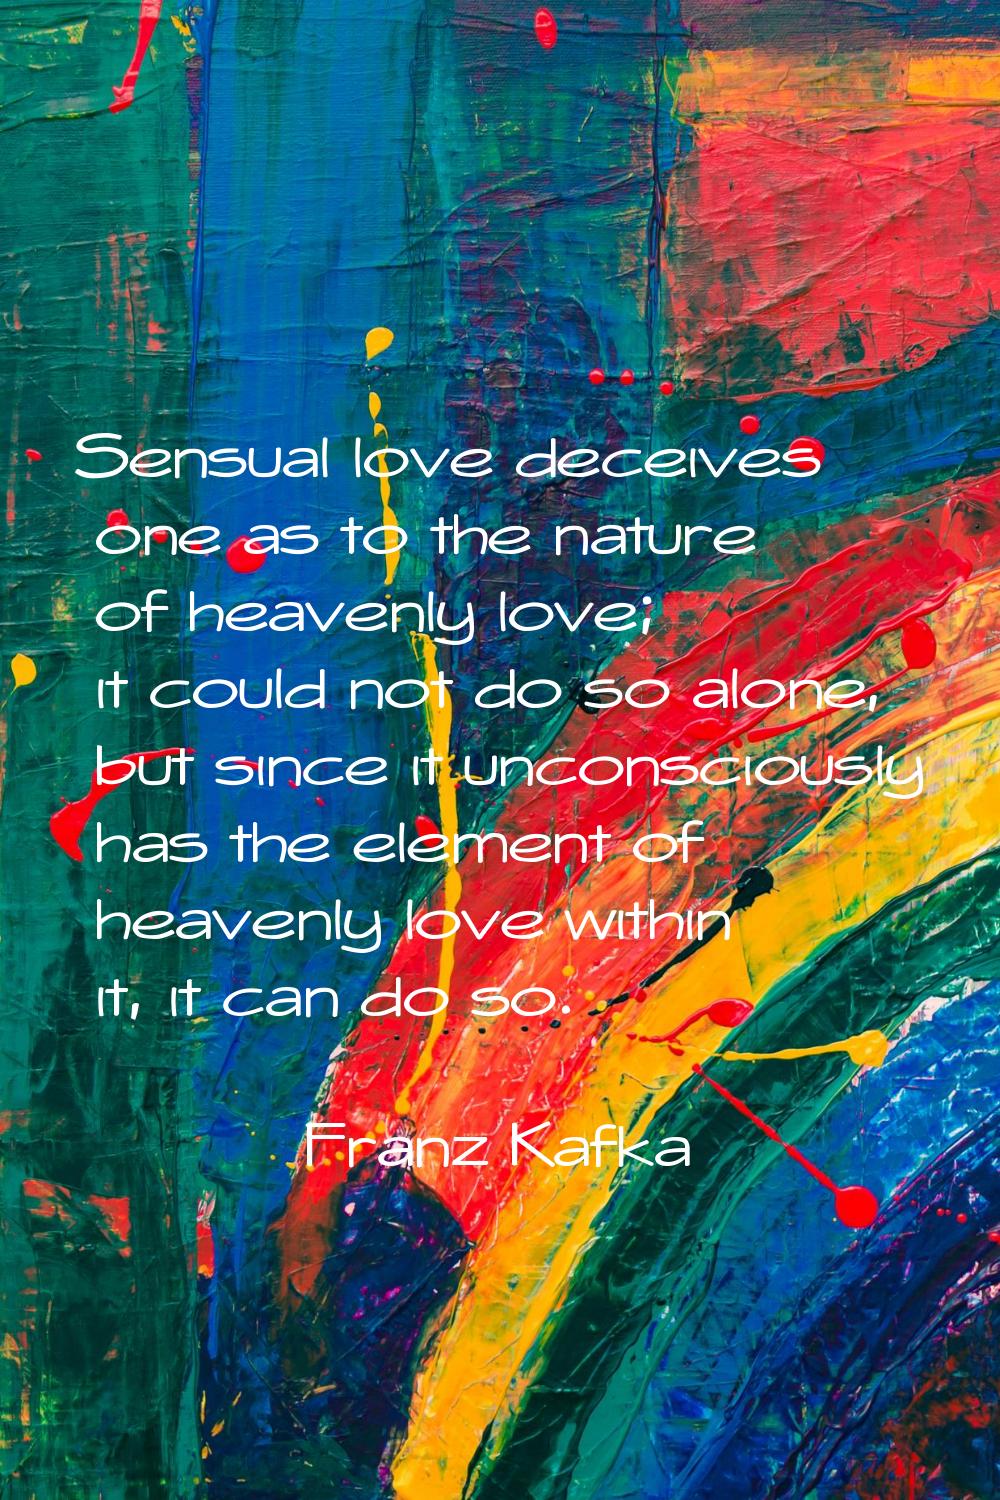 Sensual love deceives one as to the nature of heavenly love; it could not do so alone, but since it